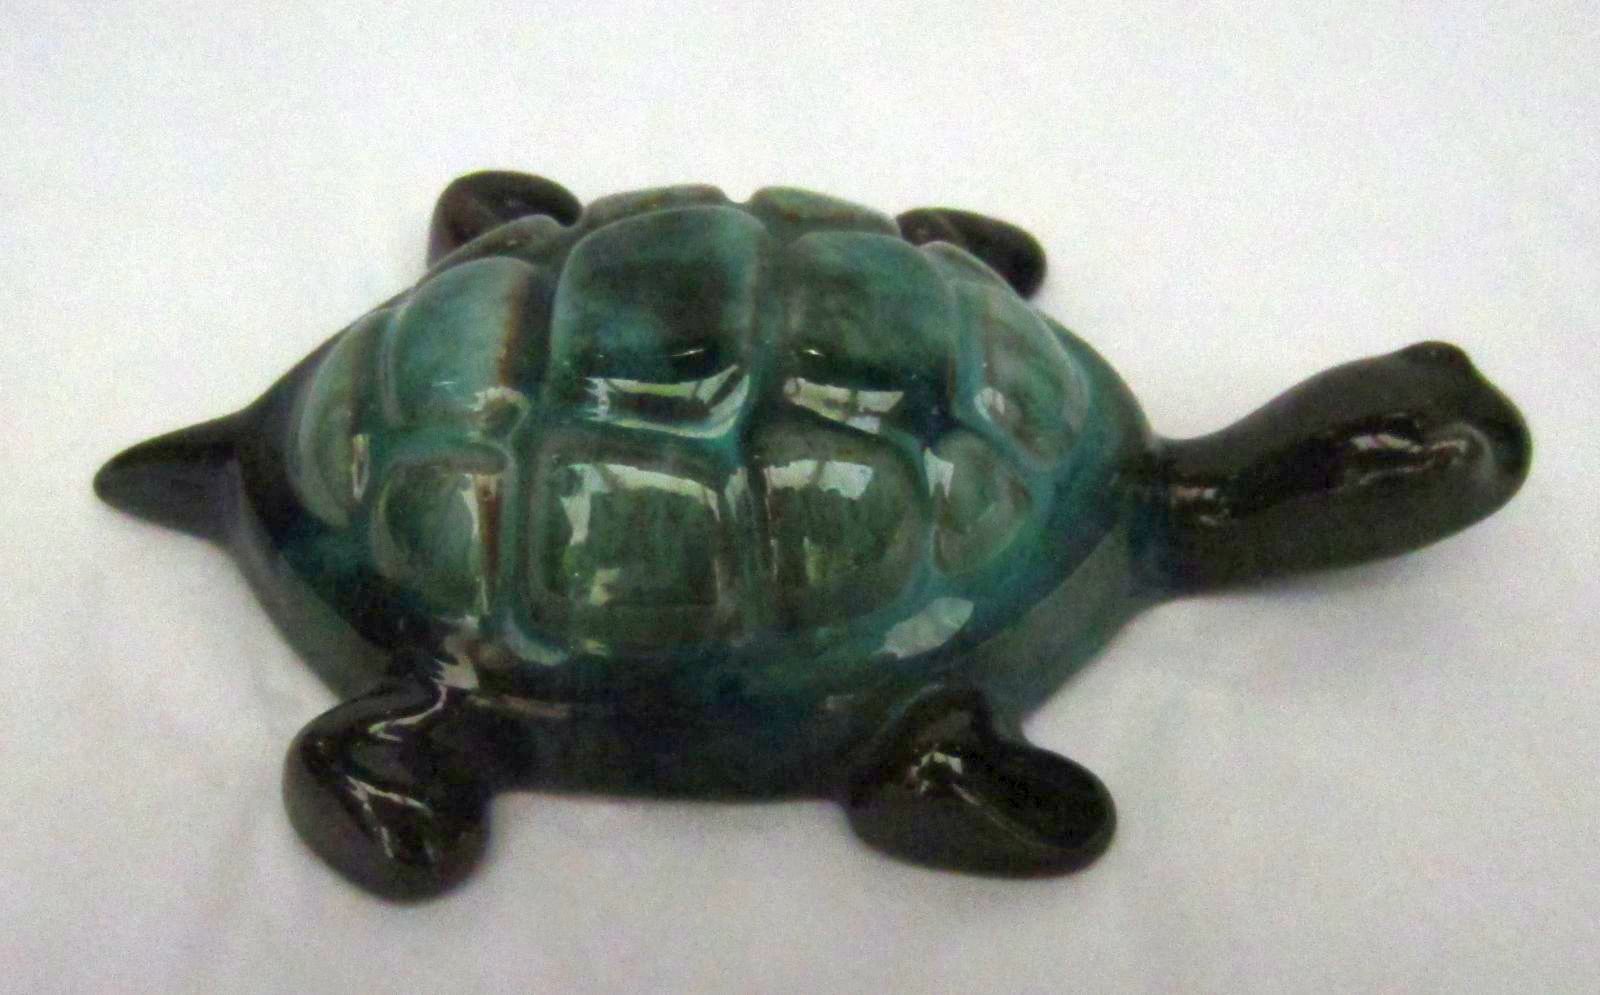 Primary image for Blue Mountain Pottery BMP Mini Green Brown Glaze Turtle Figurine 5-1/2" long